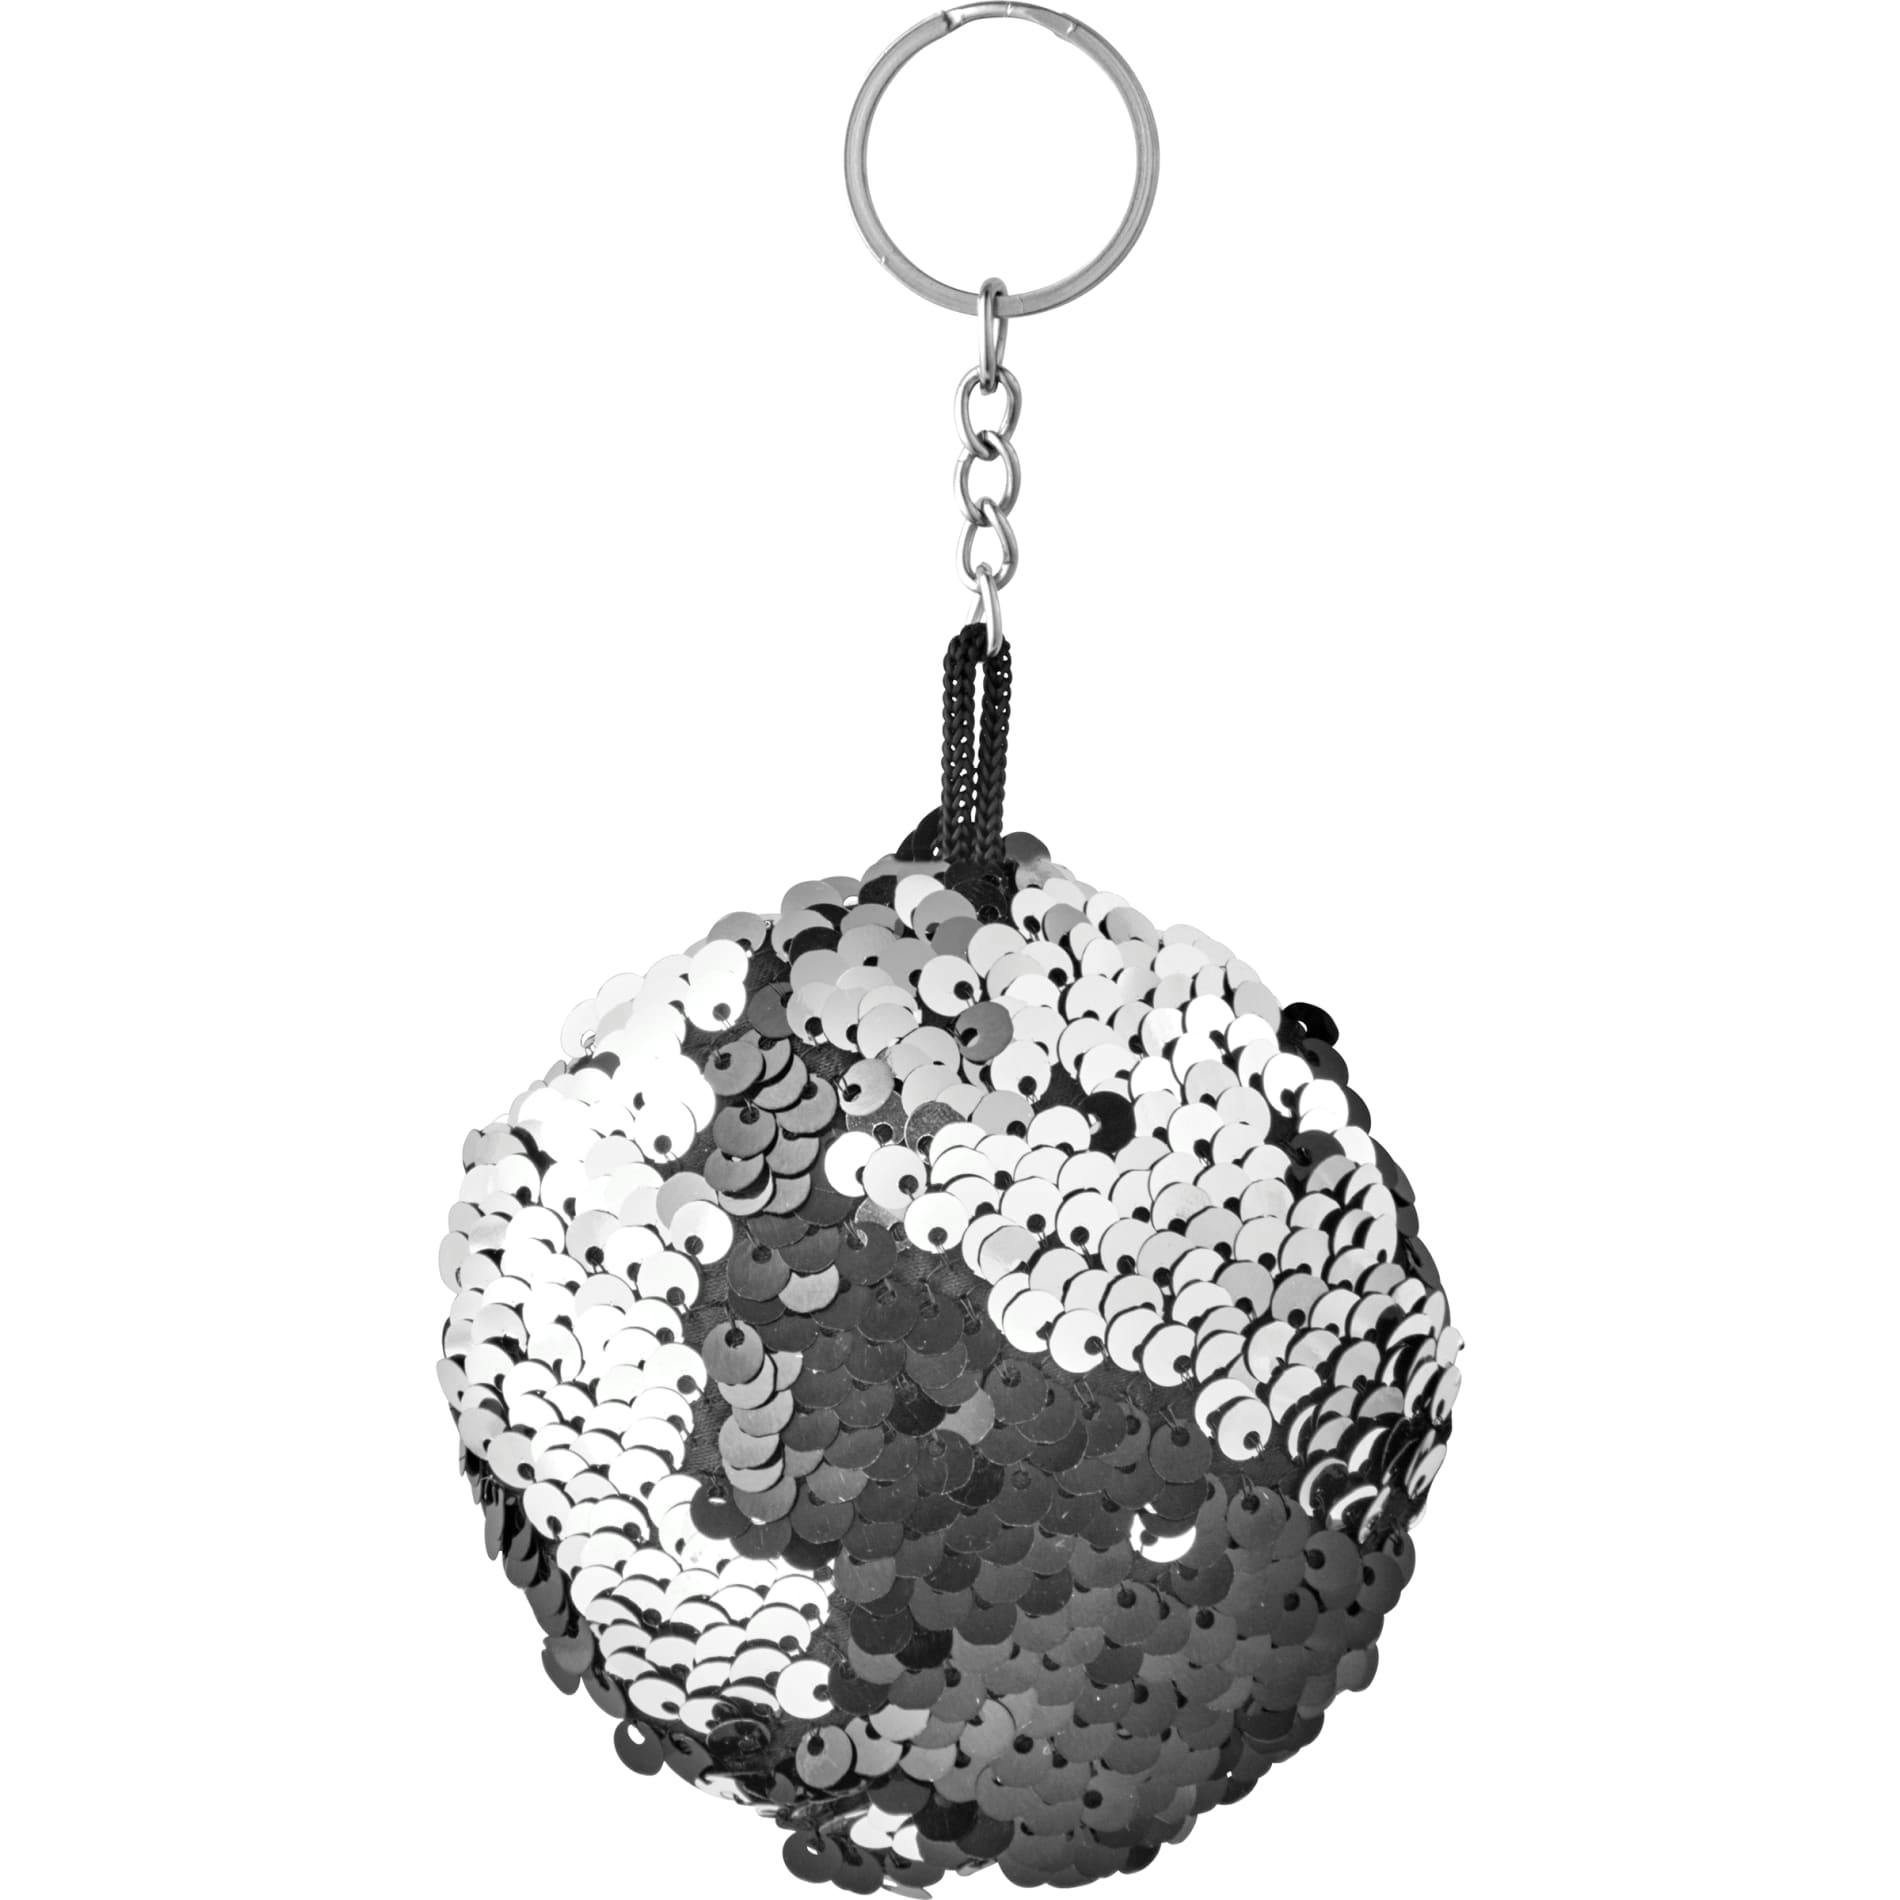 Sequin Keychain - additional Image 2